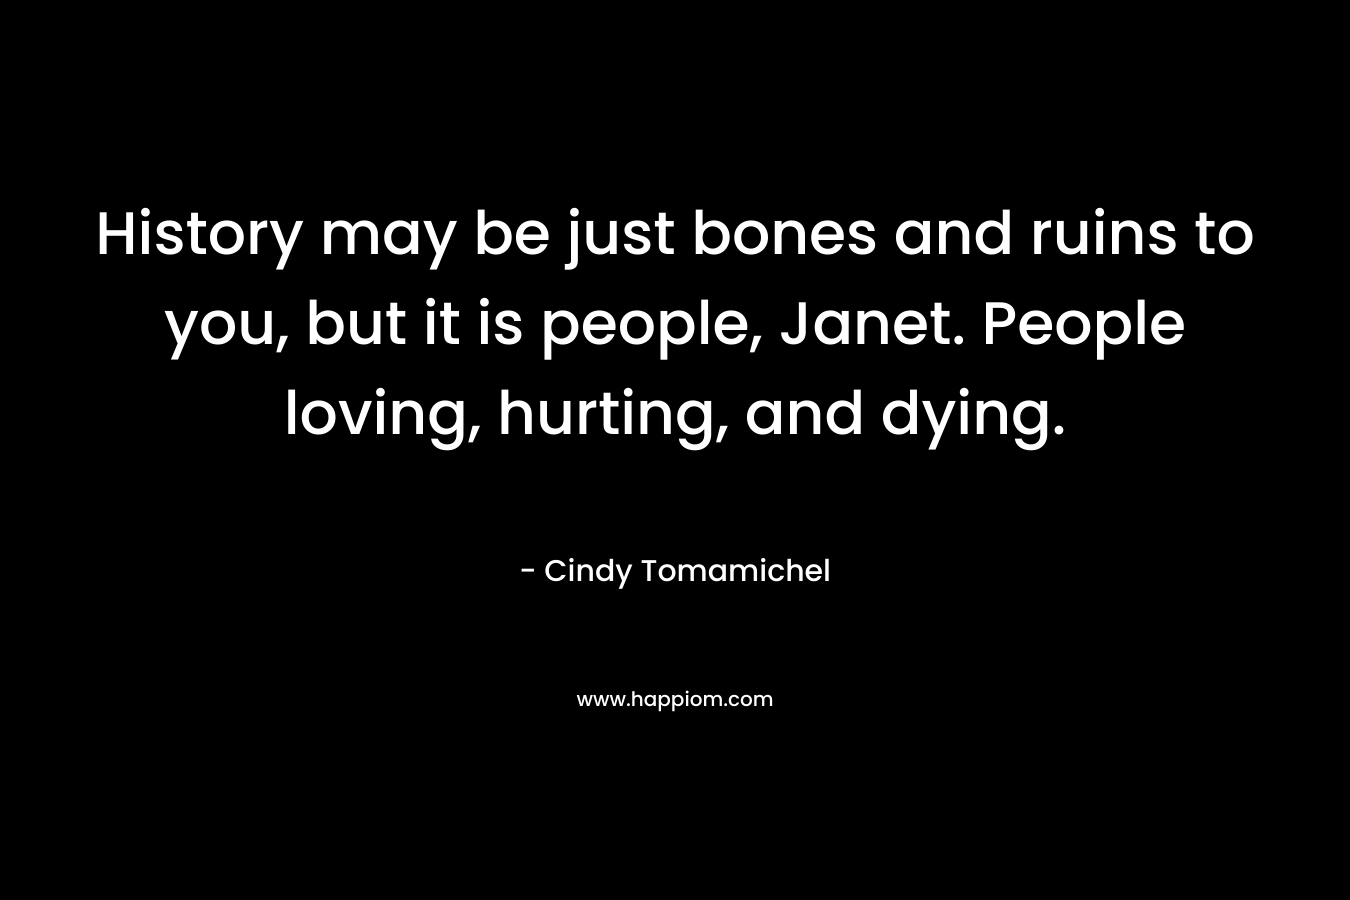 History may be just bones and ruins to you, but it is people, Janet. People loving, hurting, and dying. – Cindy Tomamichel